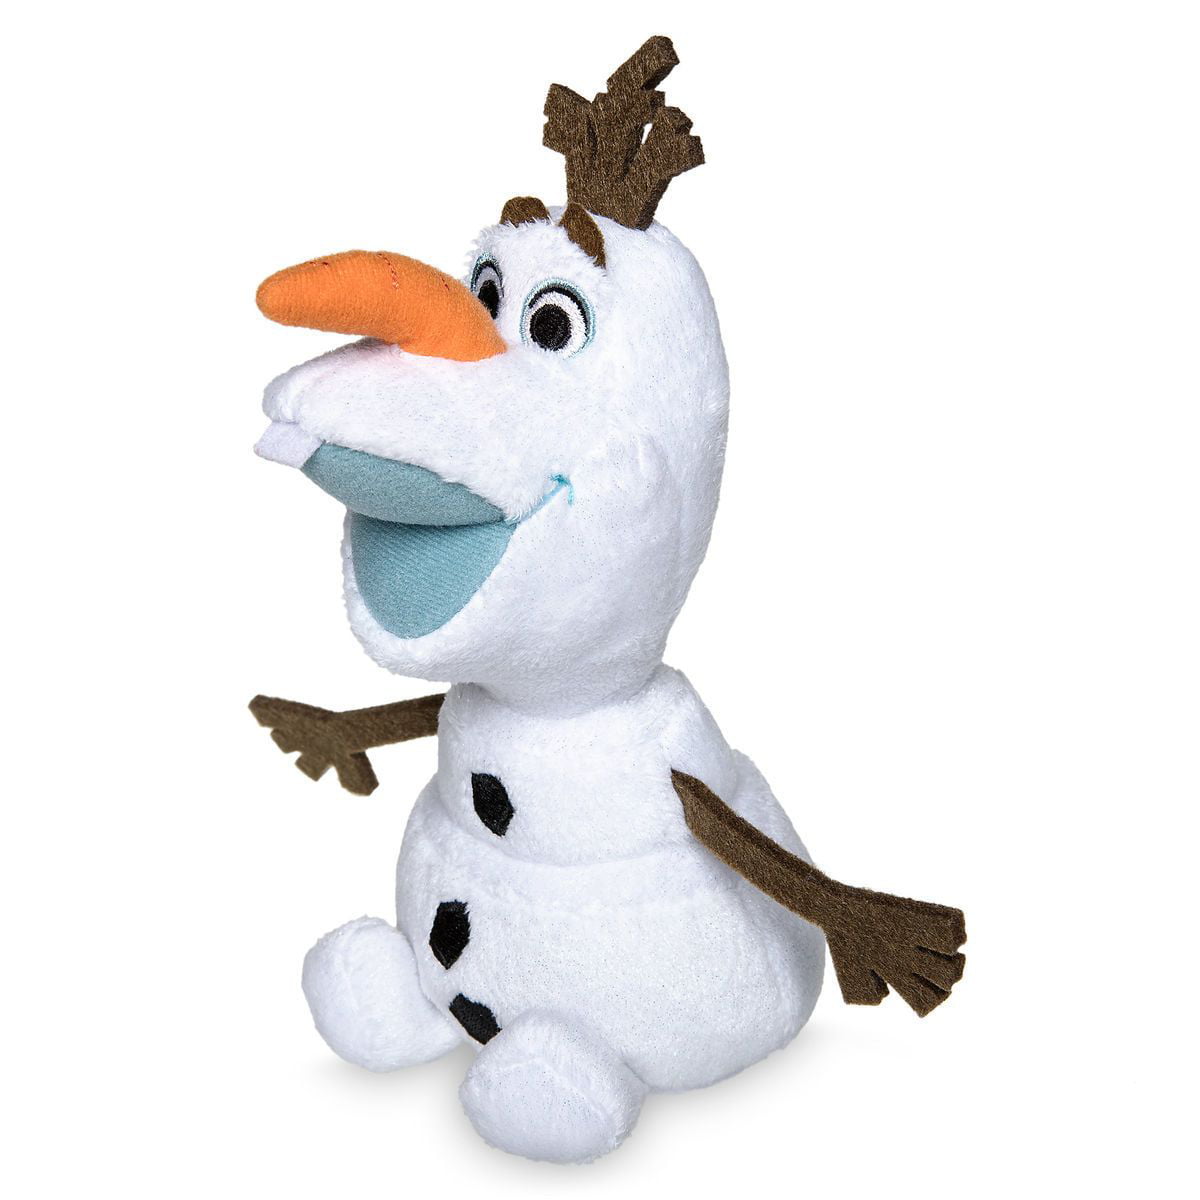 Details about   Disney Frozen Movie ~ 7" Olaf Holiday Plush ~ Mini Bean Bag from Disney Store